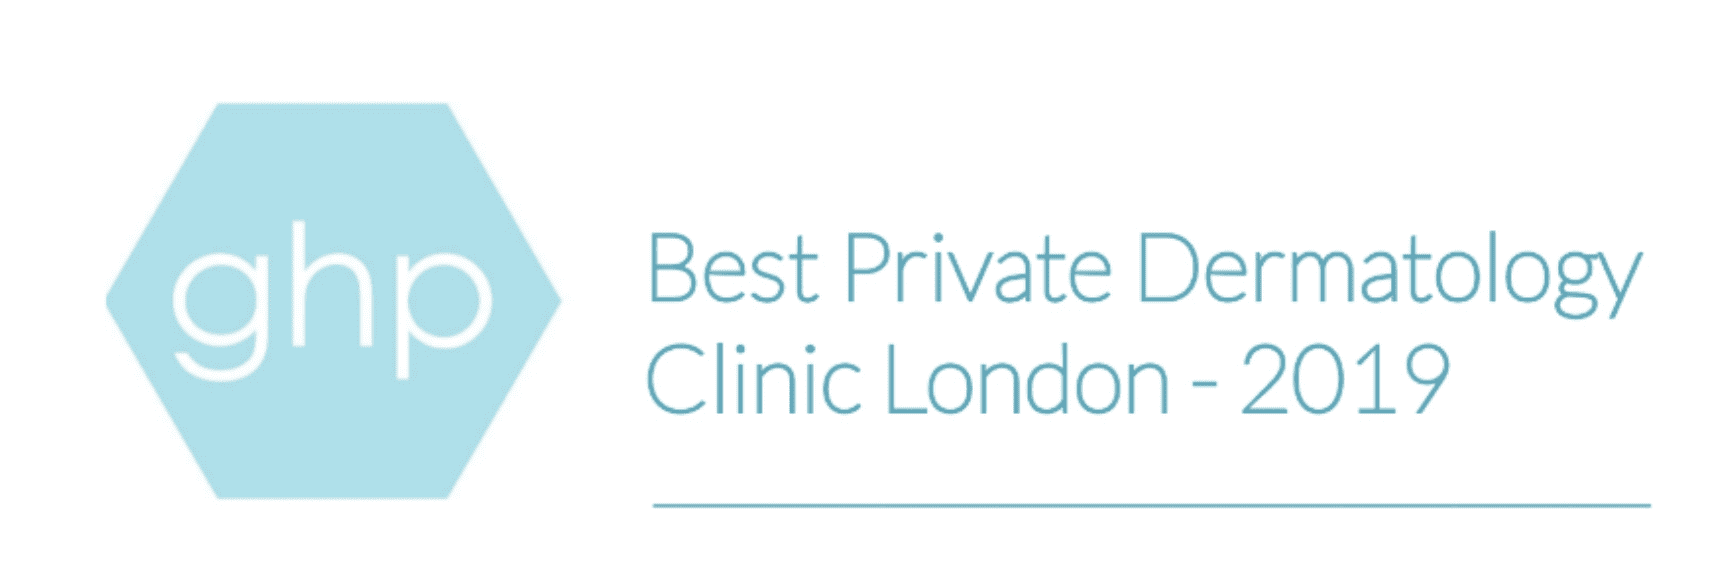 A logo for the best private dental clinic london